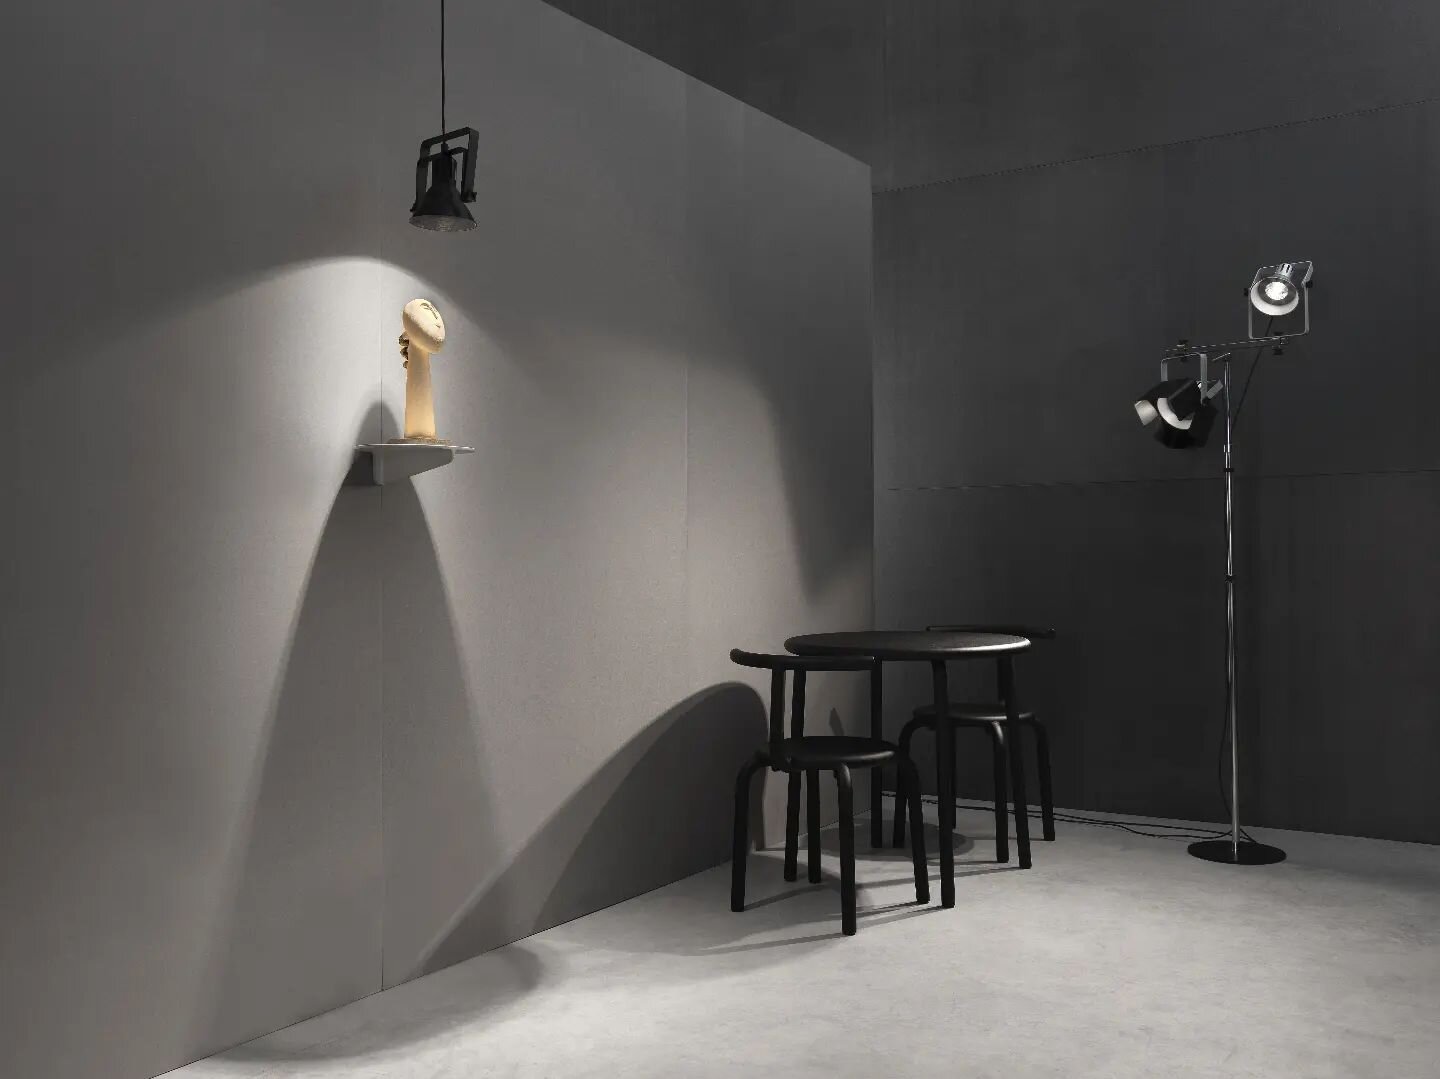 YK100AR/E - Yrj&ouml; Kukkapuro

18-21/5/22 during @stockholmcreativeedition

This week marks the launch of a collaboration between one of Finland's most renowned and award winning furniture designers and Swedish lighting manufacturer BLOND.

The YK1